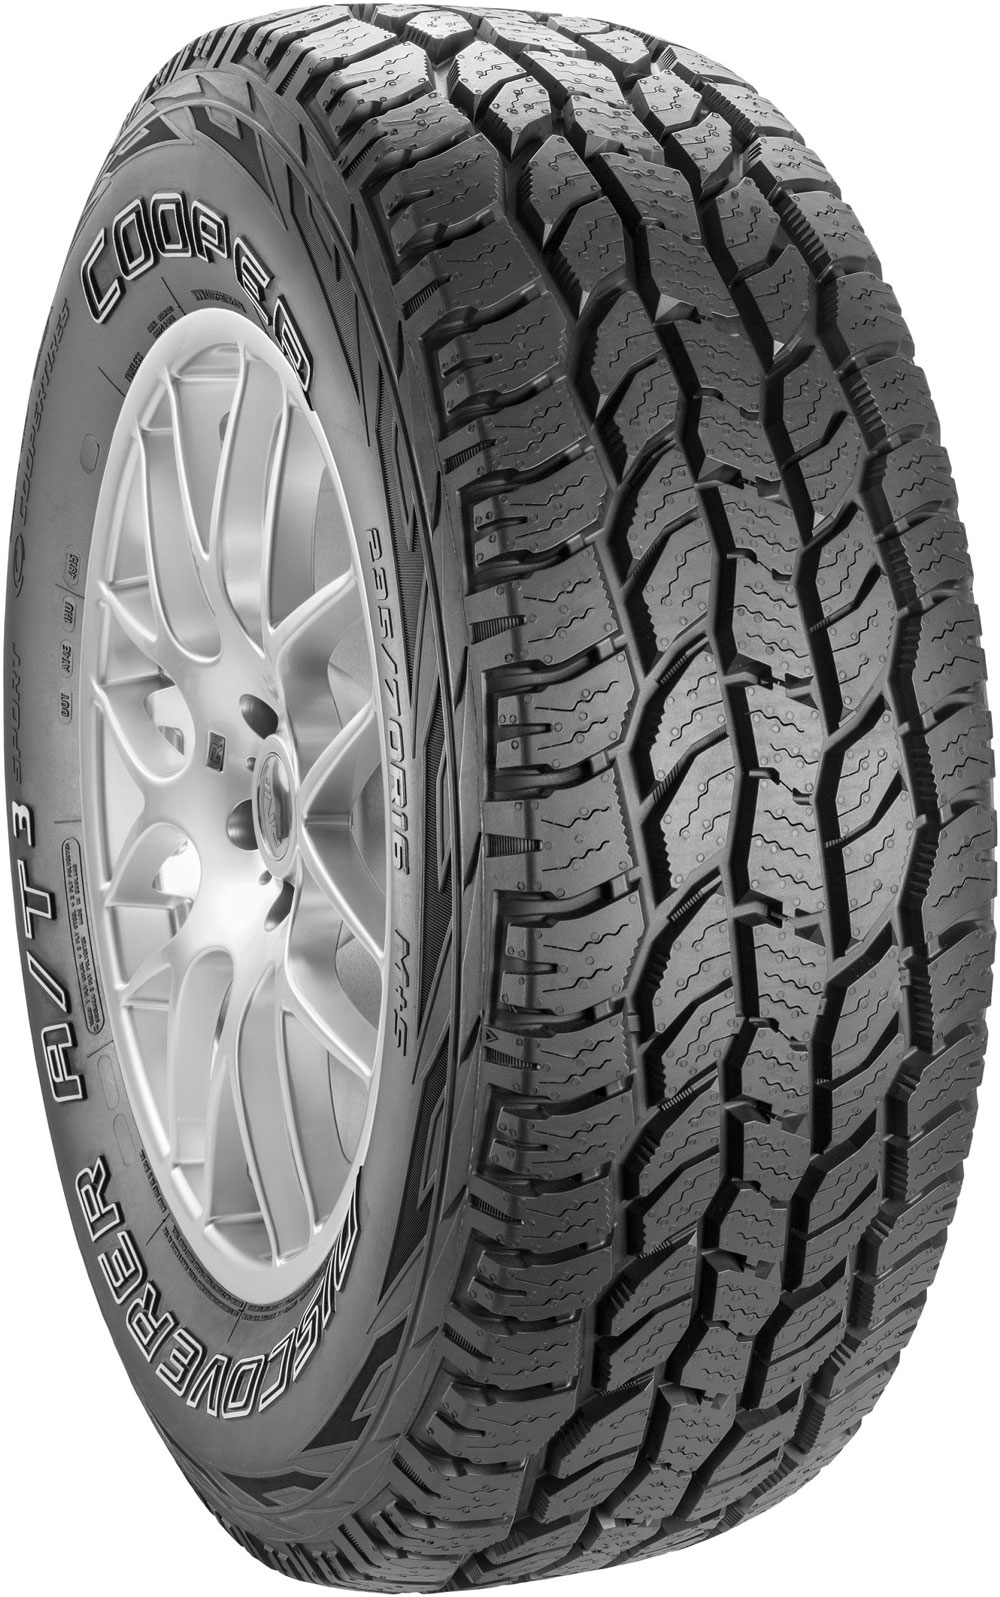 Anvelope jeep COOPER DISCA/T3SP 255/70 R16 111T